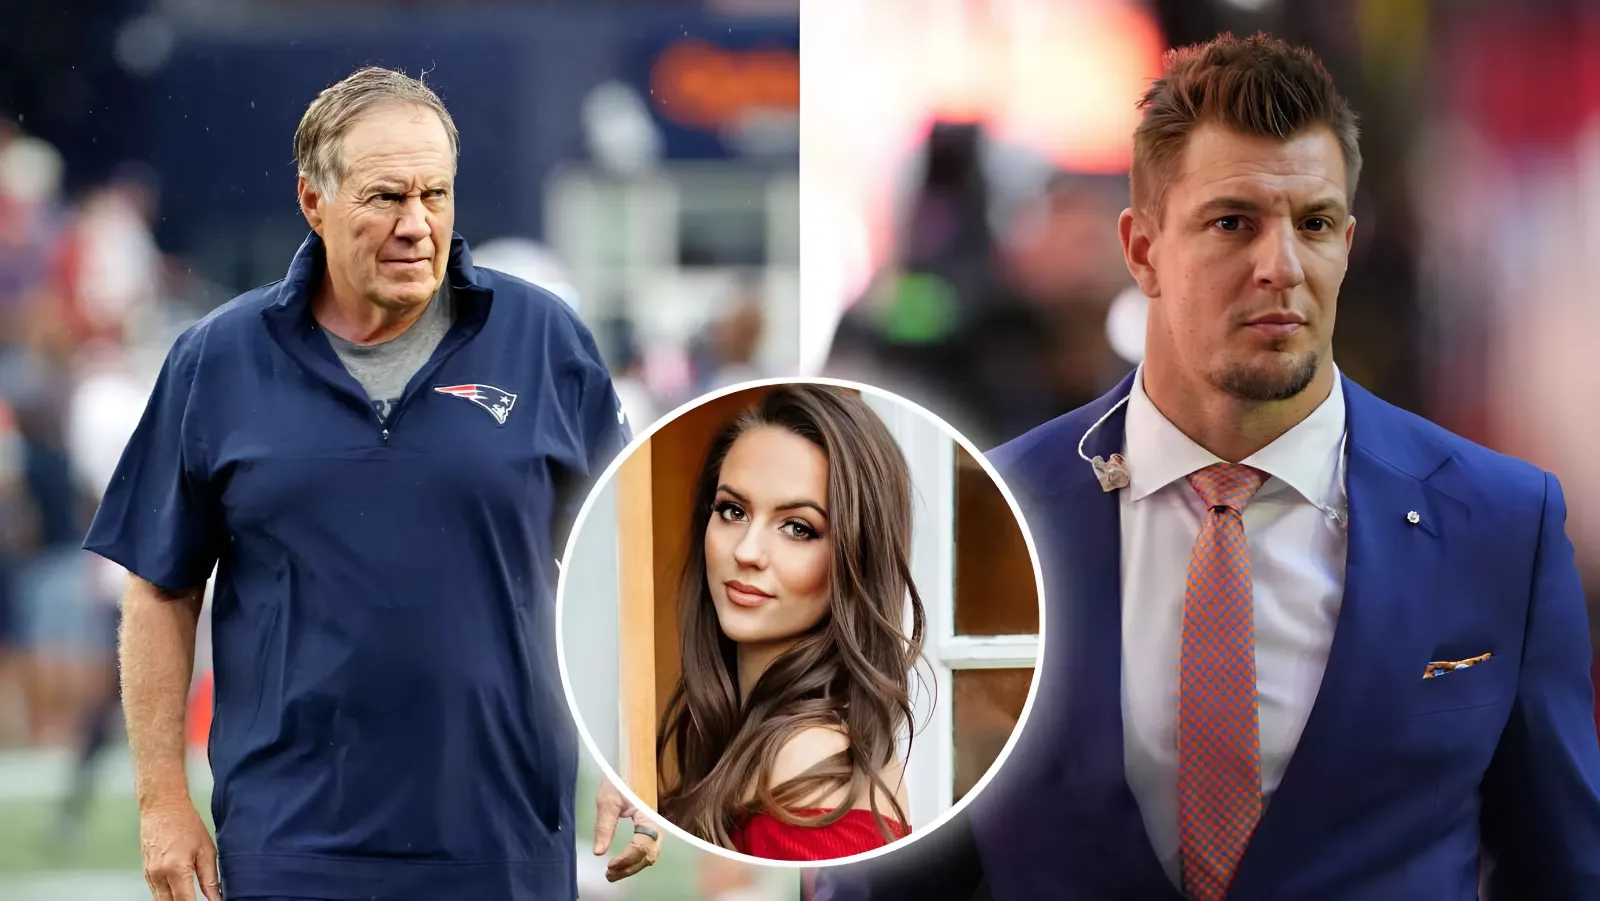 Rob Gronkowski’s naughty reaction to Bill Belichick dating a 24-year-old goes viral